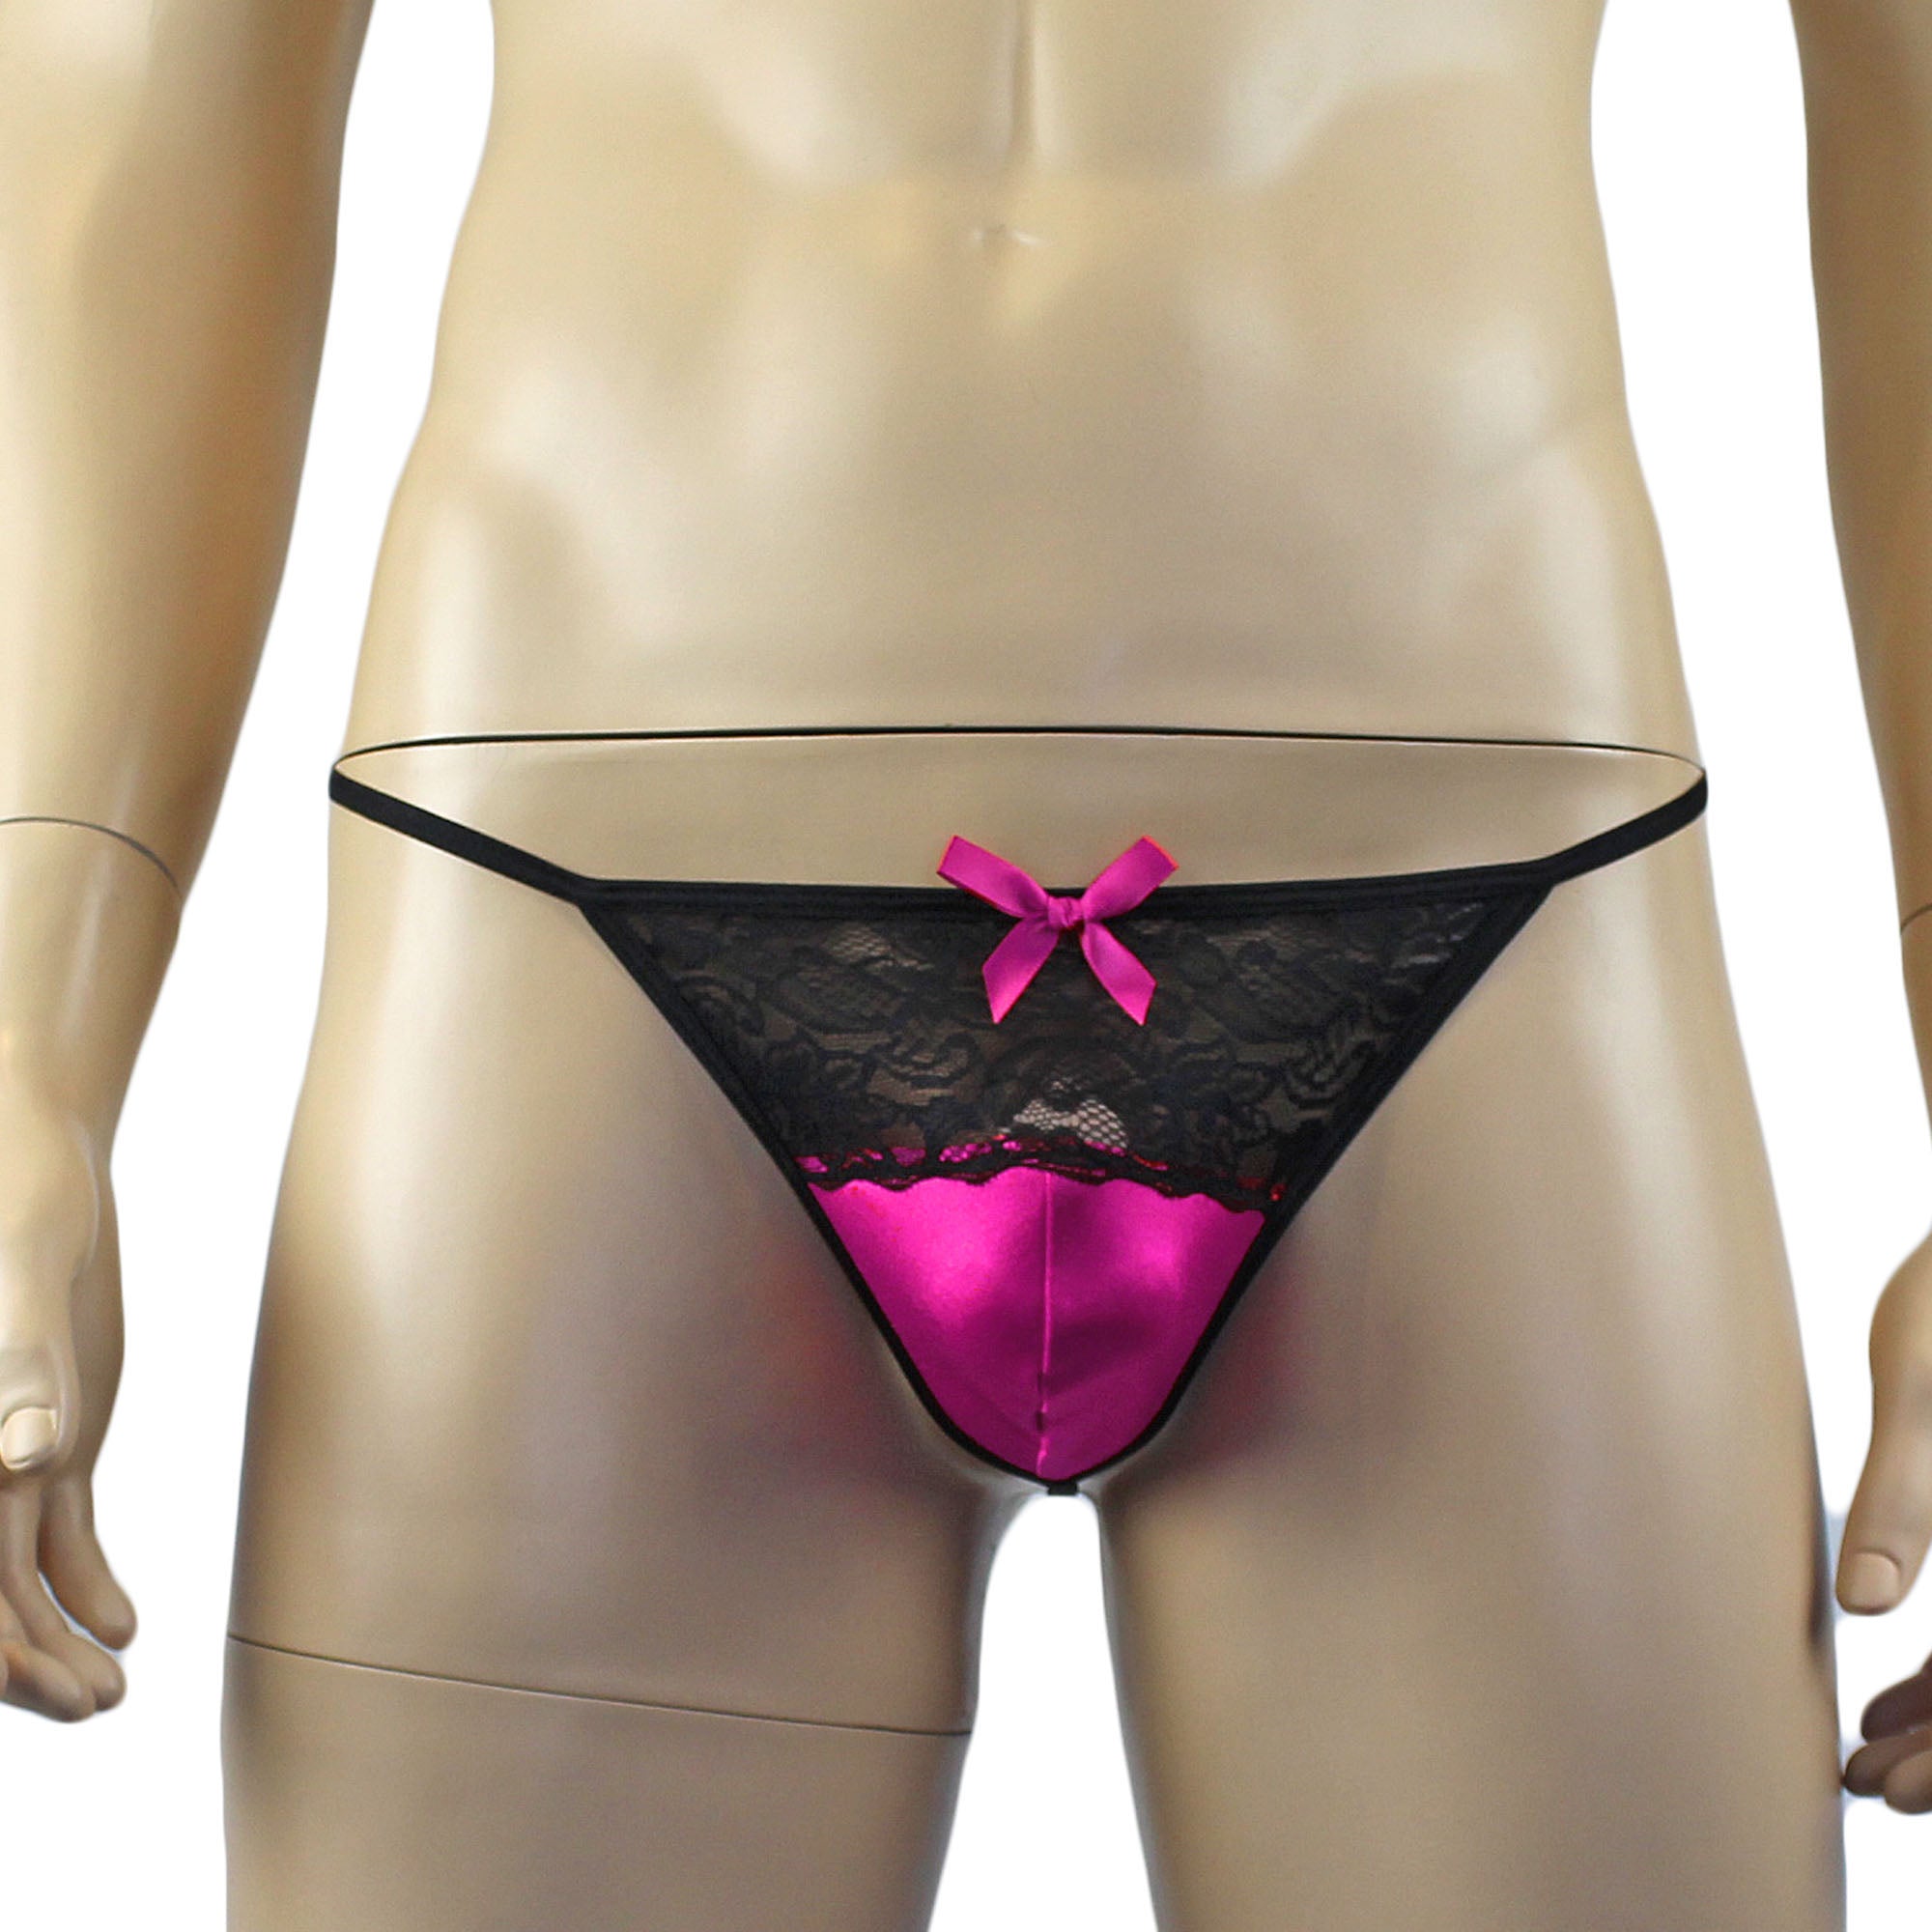 Mens Joanne Camisole Bustier Garter Top with Pouch G string & Stockings - Sizes up to 3XL Hot Pink and Black Lace